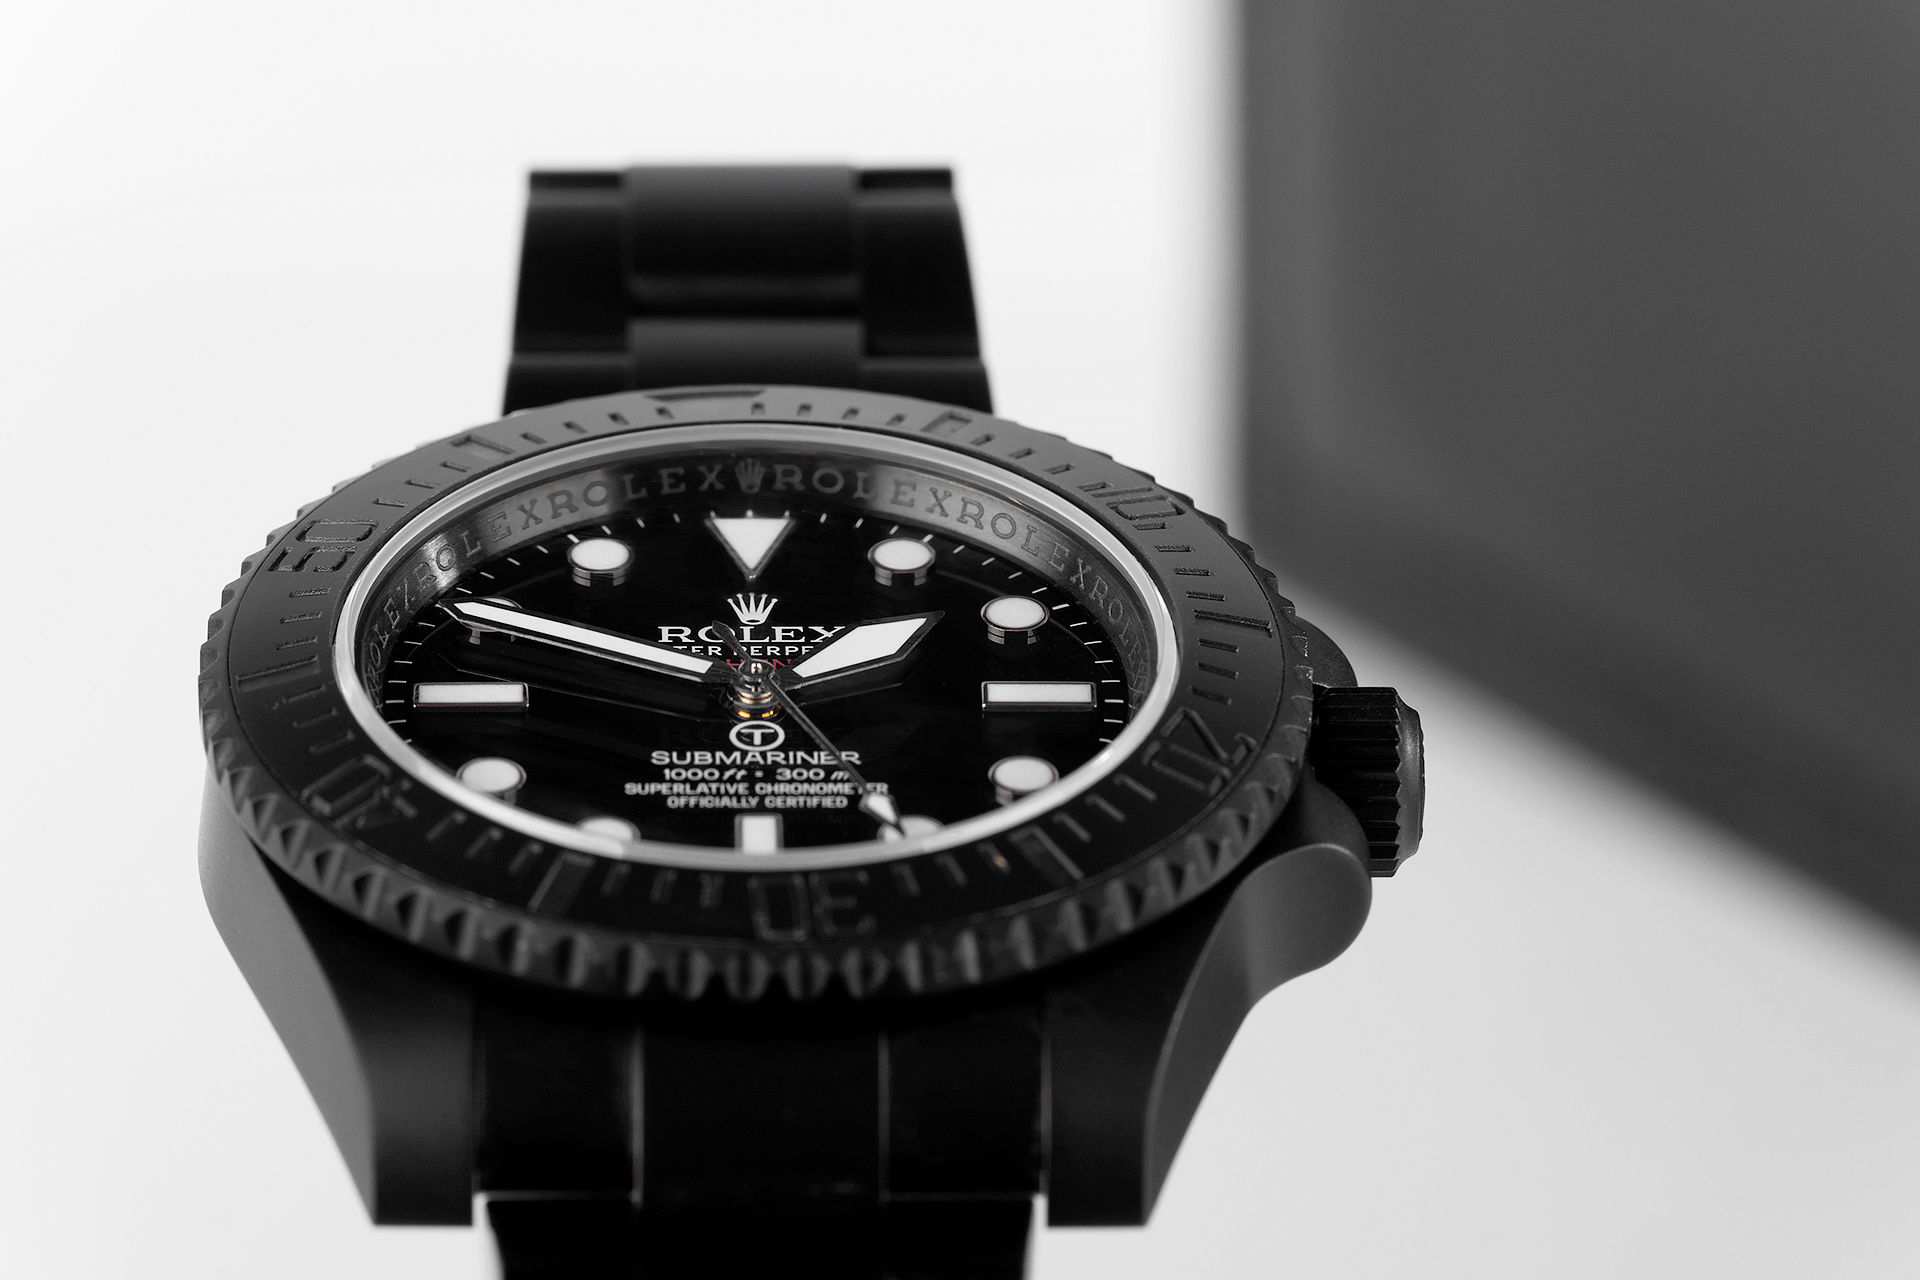 ref 114060 | 'Military' 1 of 100 Limited Edition | Pro Hunter Submariner